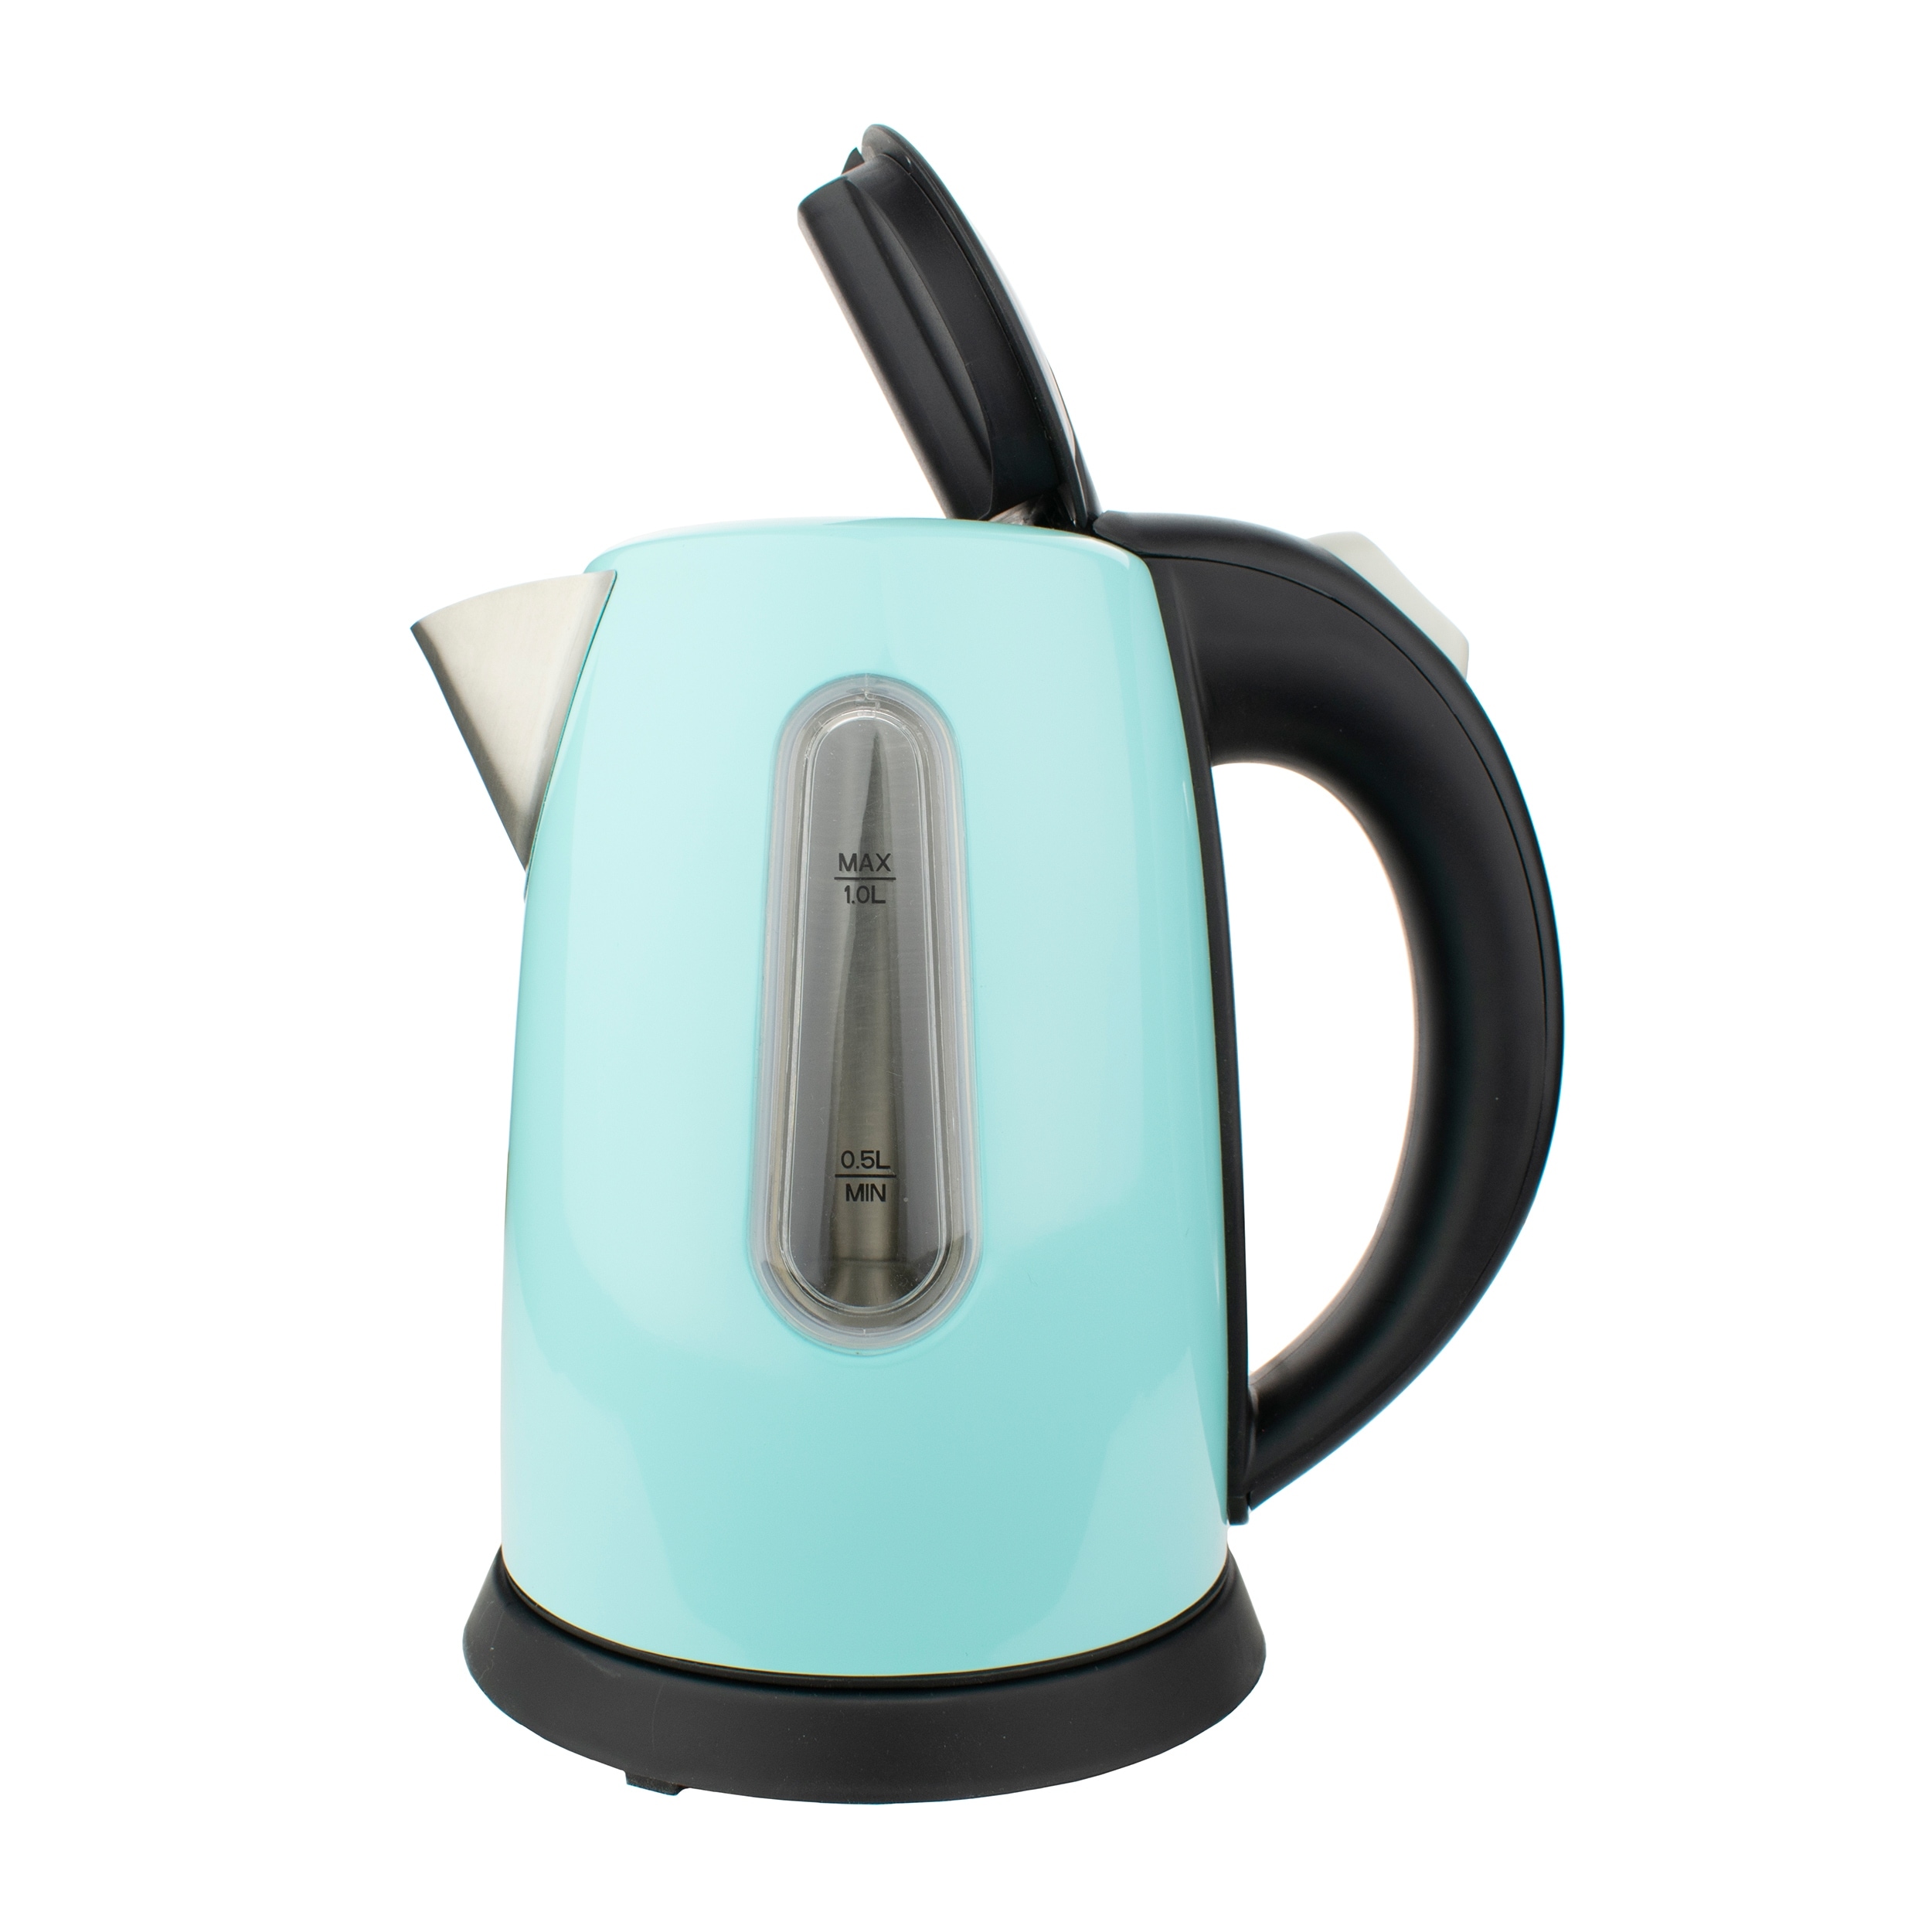 https://ak1.ostkcdn.com/images/products/is/images/direct/4a7cc56c8faf45448f30f80d084be5c43d833a92/Brentwood-1-Liter-Stainless-Steel-Cordless-Electric-Kettle-in-Blue.jpg